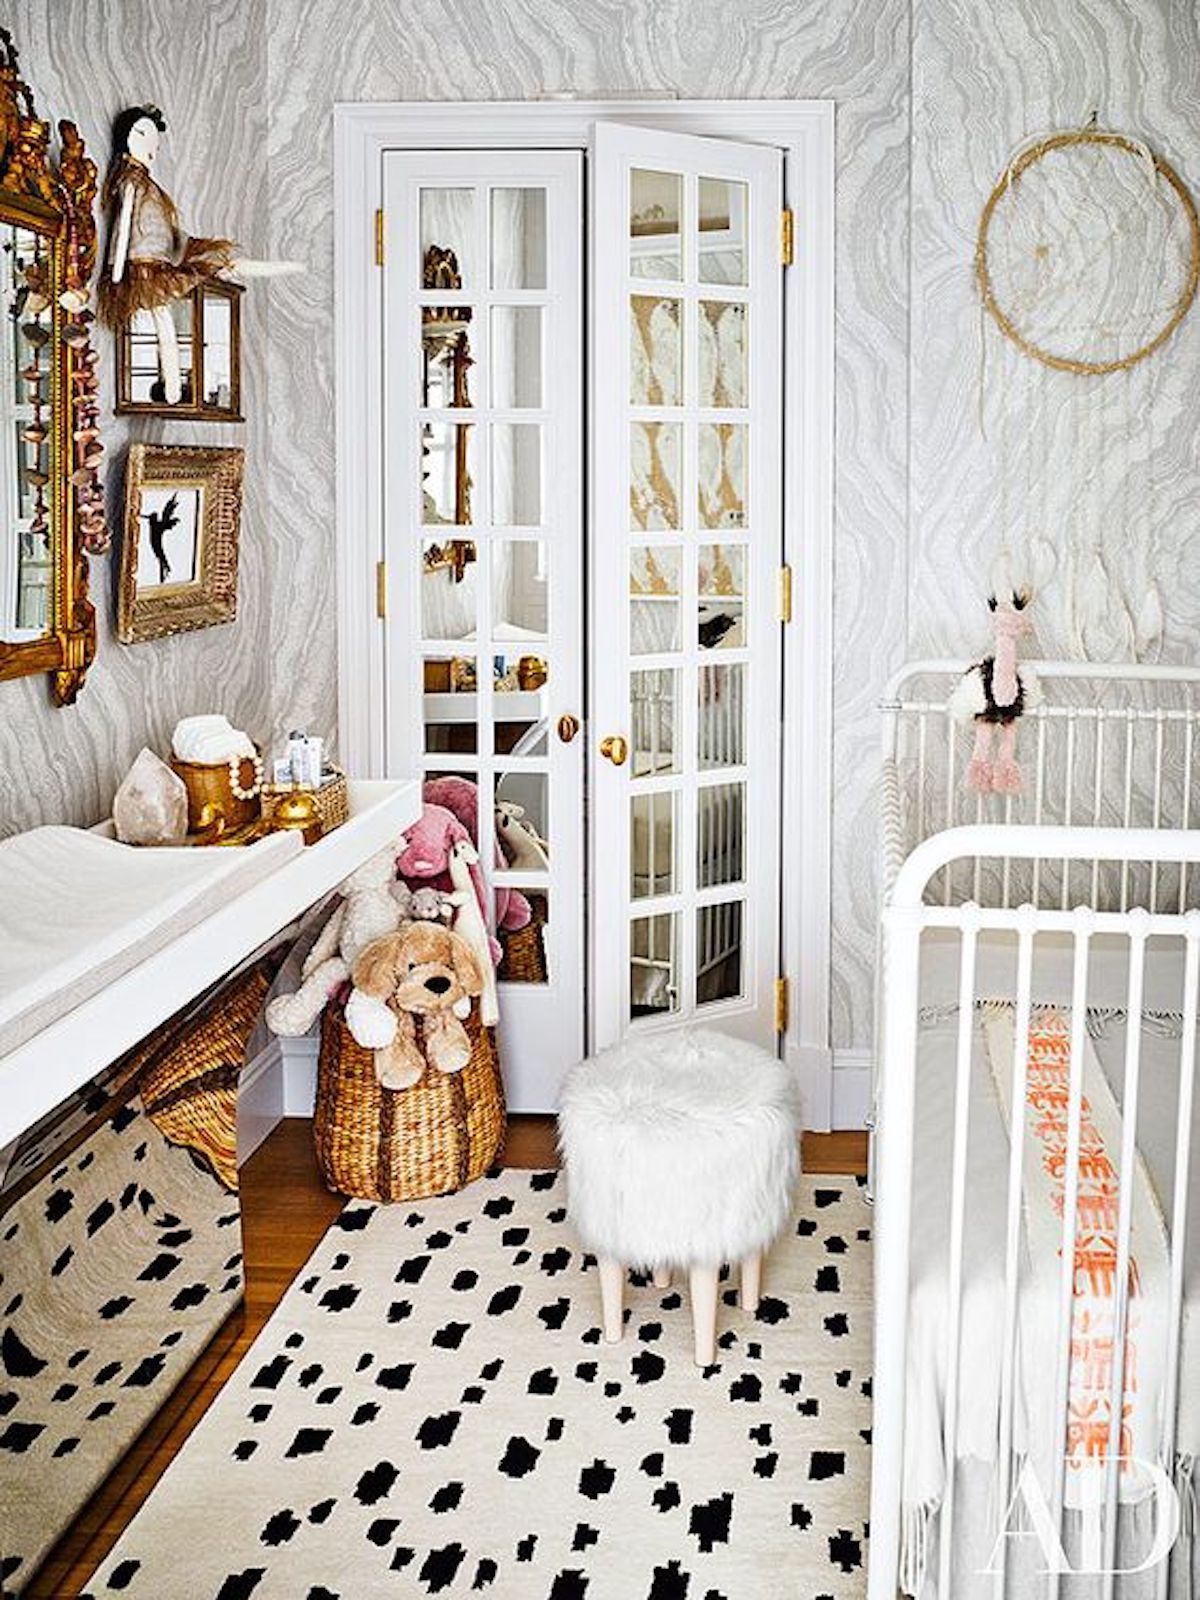 Textured wall and rug in nursery